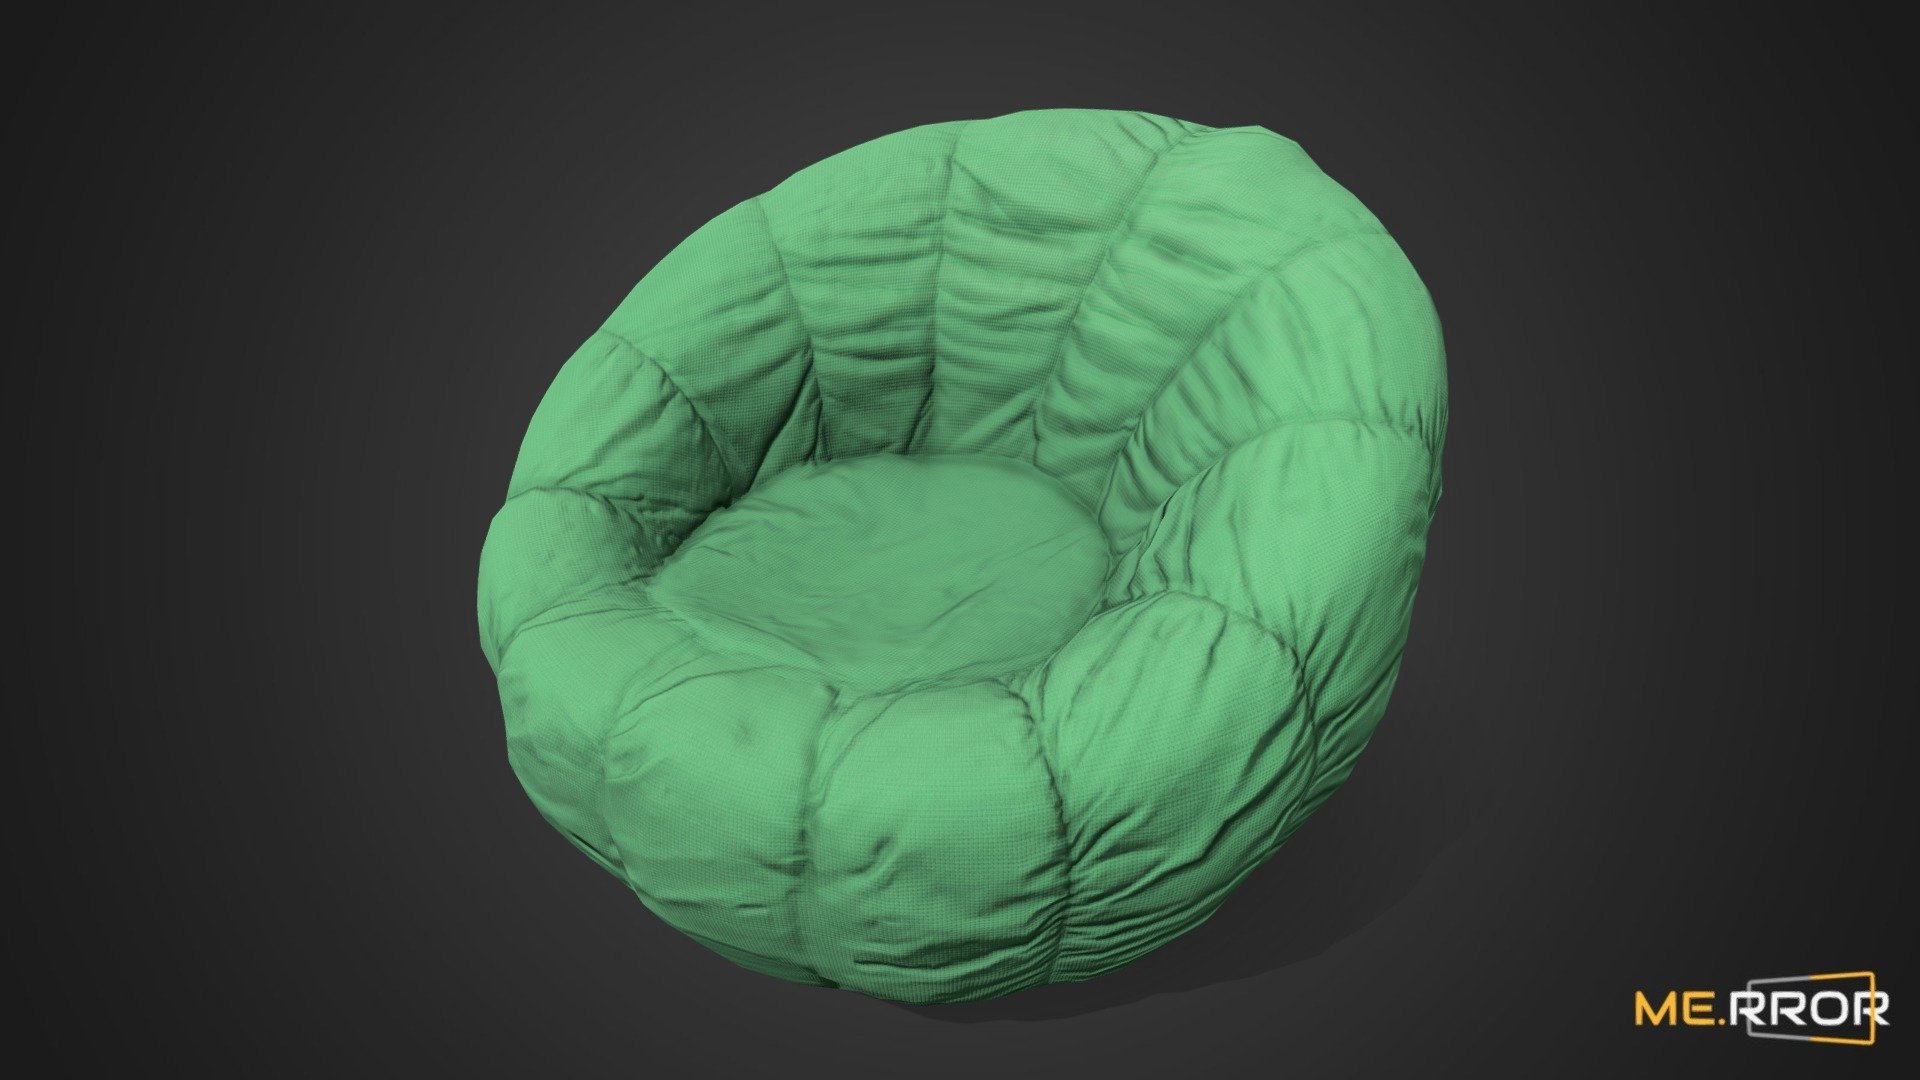 MERROR is a 3D Content PLATFORM which introduces various Asian assets to the 3D world


3DScanning #Photogrametry #ME.RROR - [Game-Ready] Green Bean Bag - Buy Royalty Free 3D model by ME.RROR Studio (@merror) 3d model